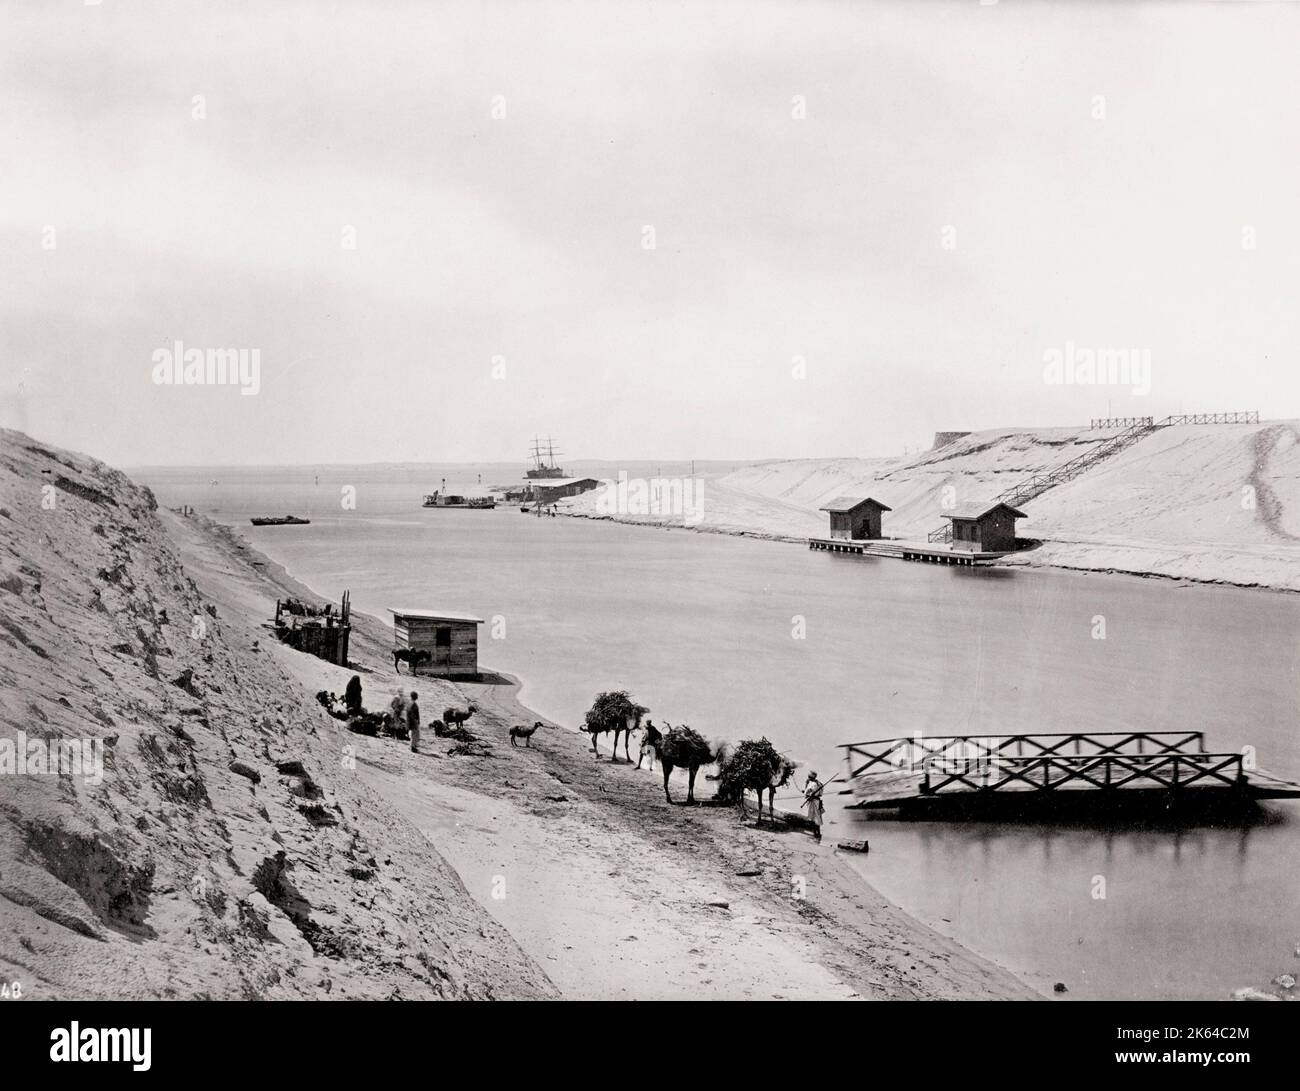 Vintage 19th century photograph: camels along the side of the Suez Canal, Egypt. Stock Photo